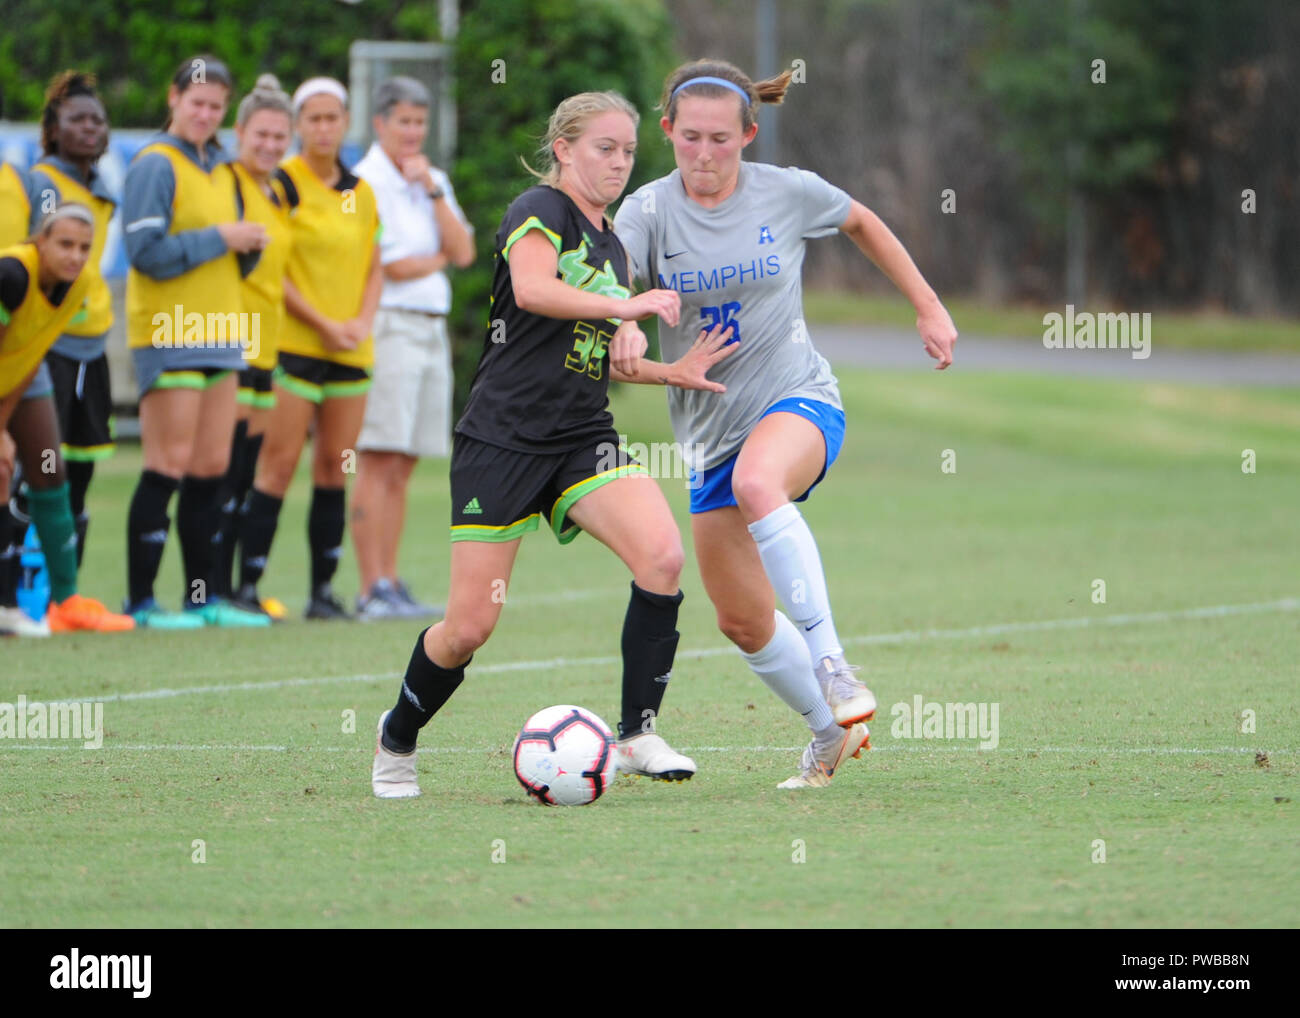 Memphis, TN, USA. 14th Oct, 2018. Central Florida midfielder, SYDNEY NASELLO (35), and Memphis Tigers defender, STASIA MALLIN (26), battle for ball control, during the NCAA soccer game between the Memphis Tigers and the South Florida Bulls at Mike Rose Soccer Complex in Memphis, TN. USF defeated Memphis, 2-0. Kevin Langley/CSM/Alamy Live News Stock Photo